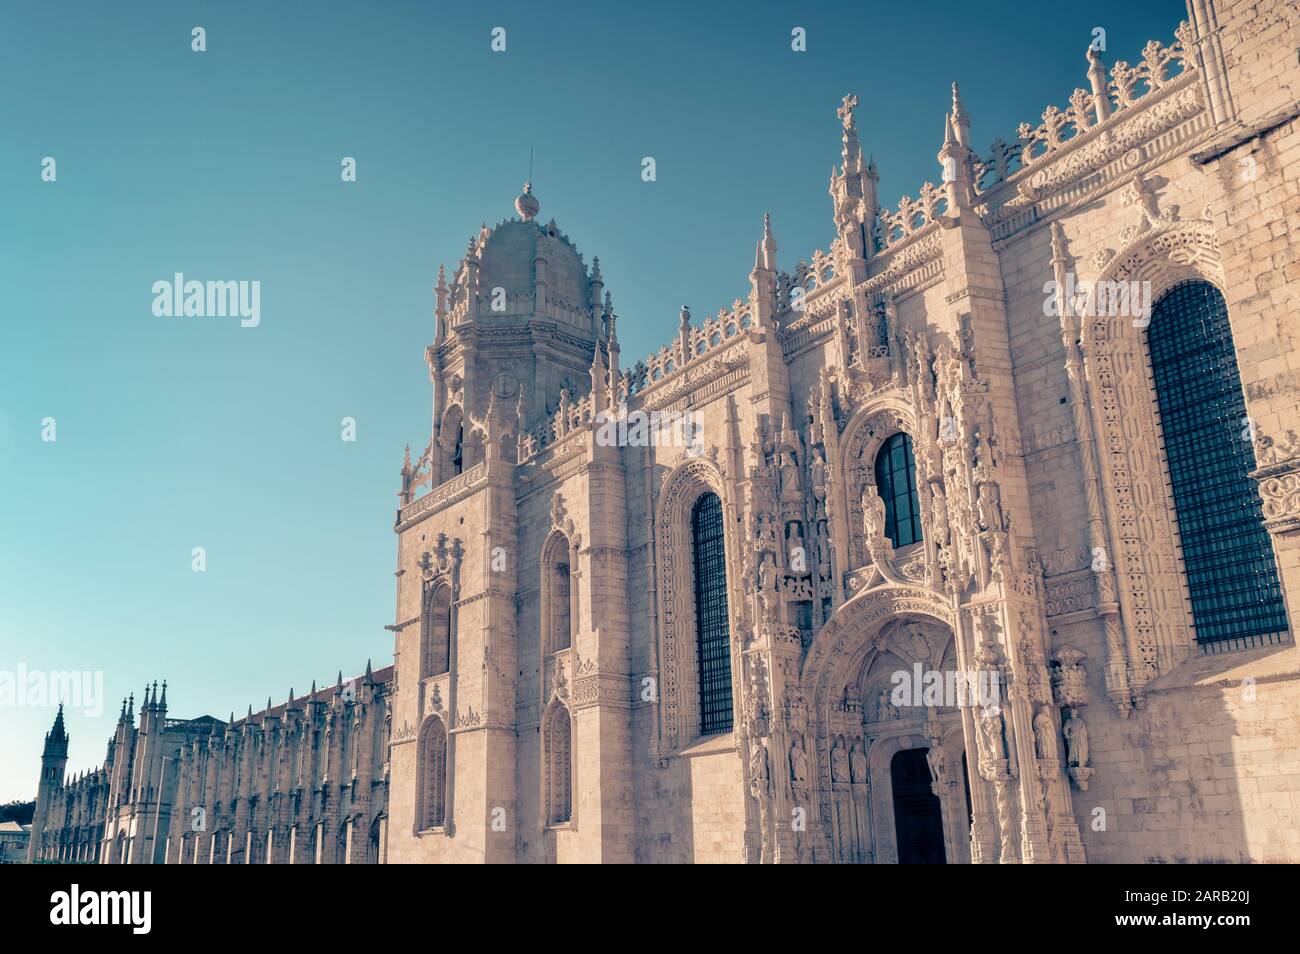 Jeronimos monastery, a UNESCO World Heritage site in Belem district in Lisbon, Portugal Stock Photo